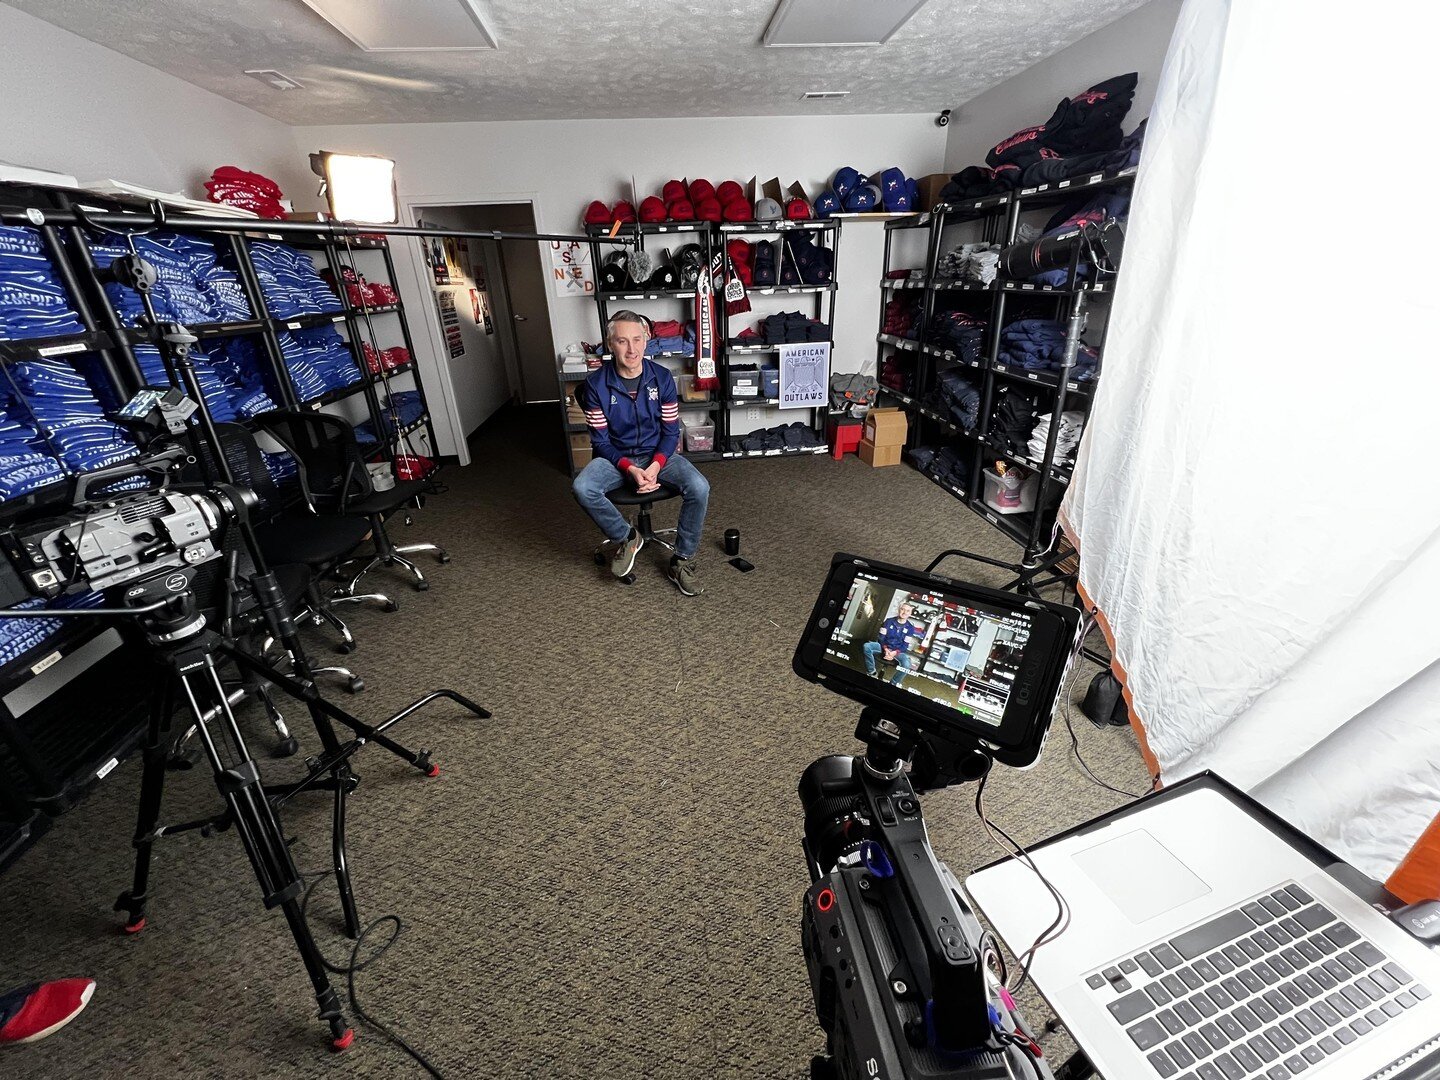 Swipe to see images from the setup. A  FIFA plus producer reached out to film a segment with the American Outlaws in Lincoln. Check out the segment linked on my website. Link in bio.
#setup  #FIFAplus #producer #AmericanOutlaws #Lincoln #filmsegment 